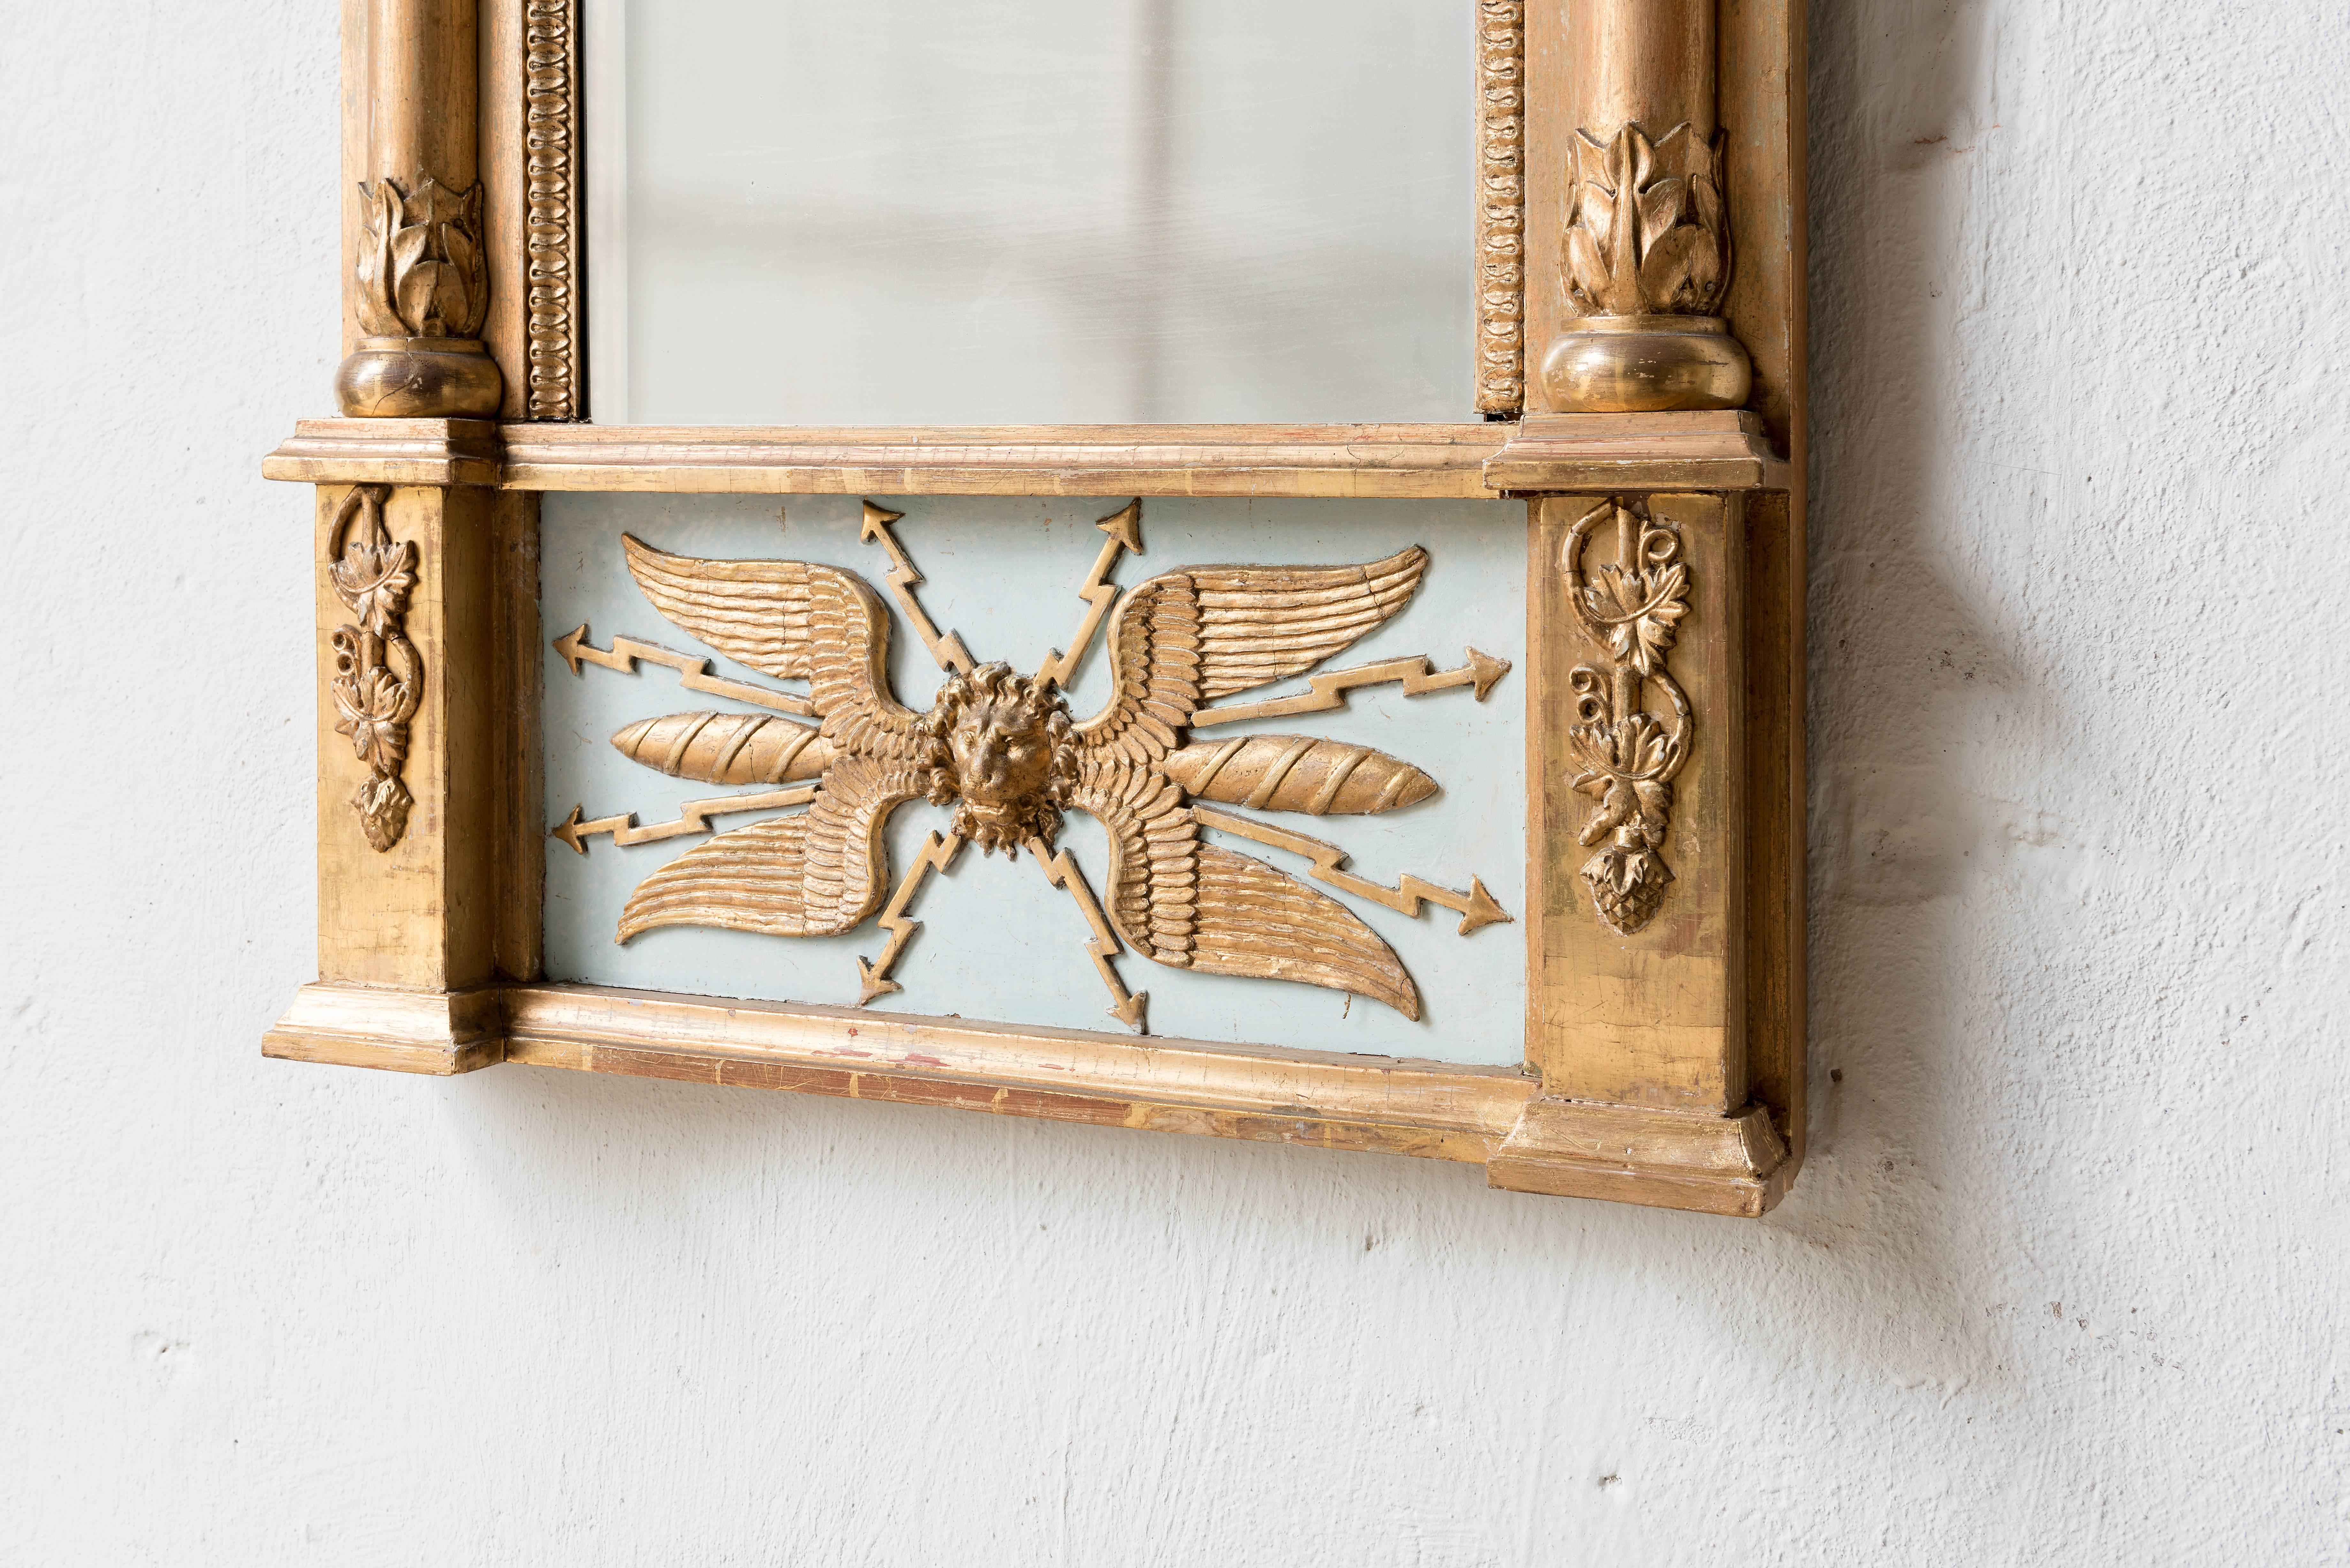 19th century Swedish Empire mirror. Original gilding and original mirror glass.
Wood carving decoration in typical Empire style.
      